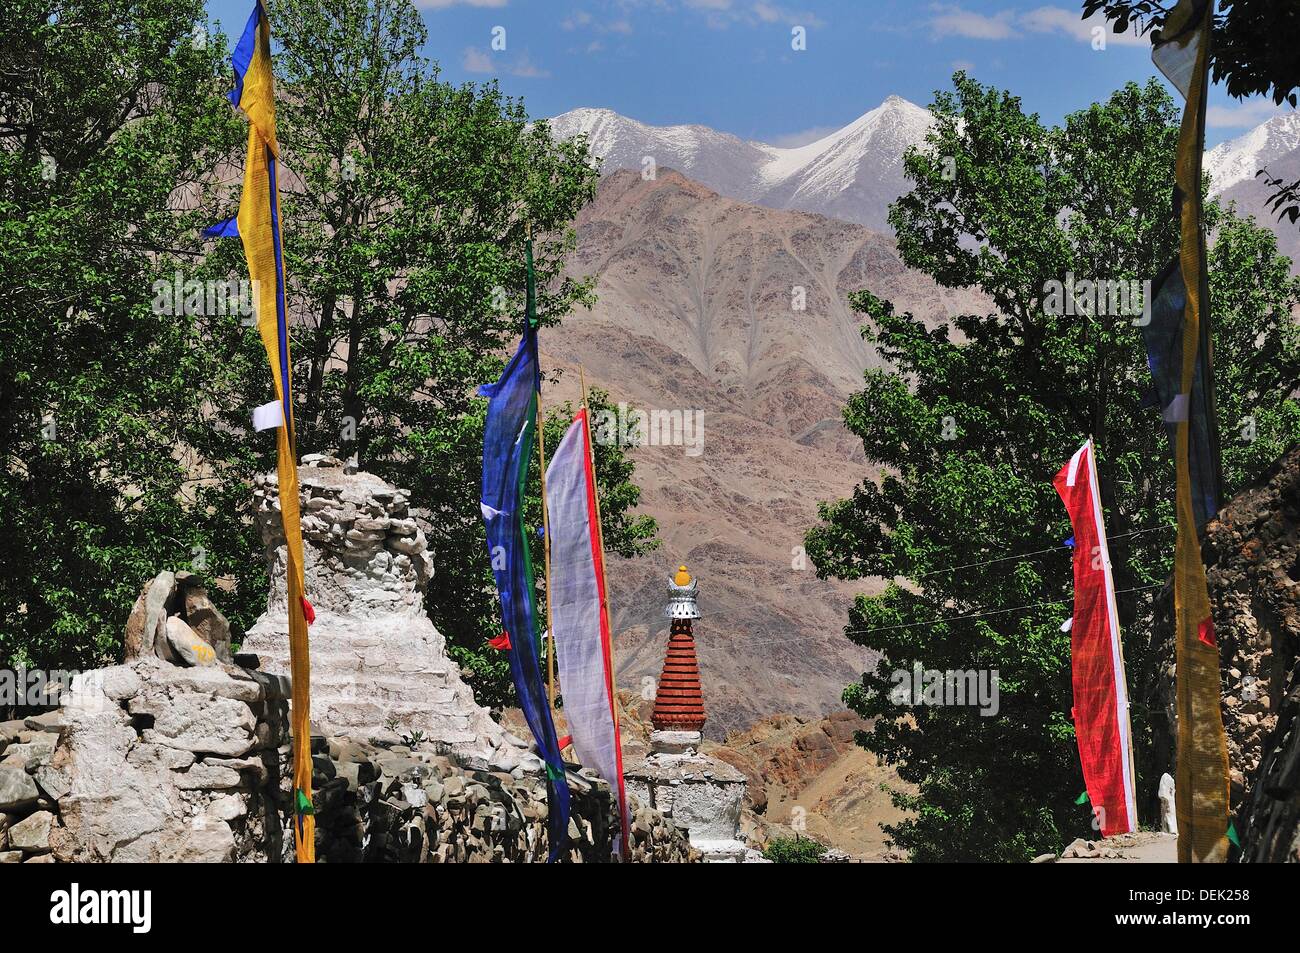 Hemis village where Tibetan Buddhist high landers lives Even midsummer it is cold and air is thin. Jammu and Kashmir, India Stock Photo